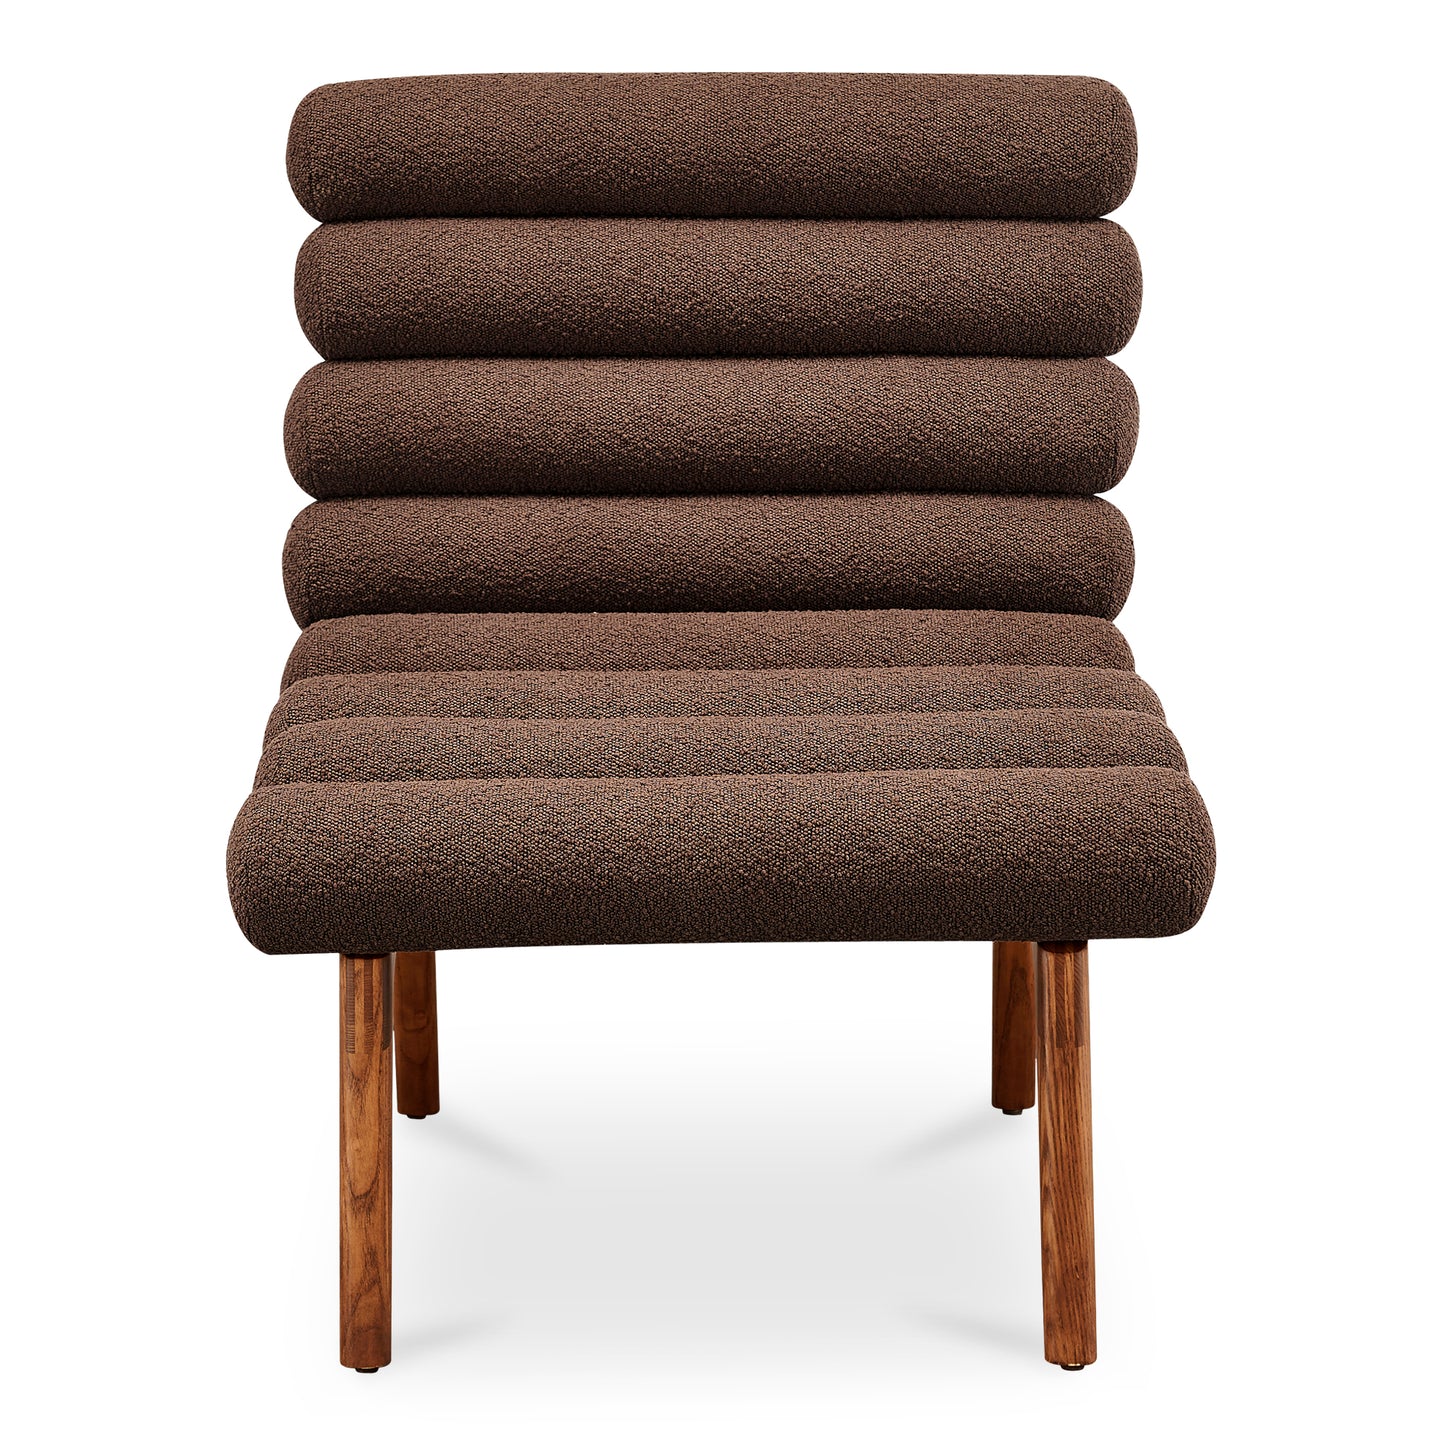 Arlo Accent Chair Performance Fabric Deep BrownChair Moe's Deep Brown   Four Hands, Mid Century Modern Furniture, Old Bones Furniture Company, Old Bones Co, Modern Mid Century, Designer Furniture, Furniture Sale, Warehouse Furniture Sale, Arlo Accent Chair Performance Fabric Sale, https://www.oldbonesco.com/